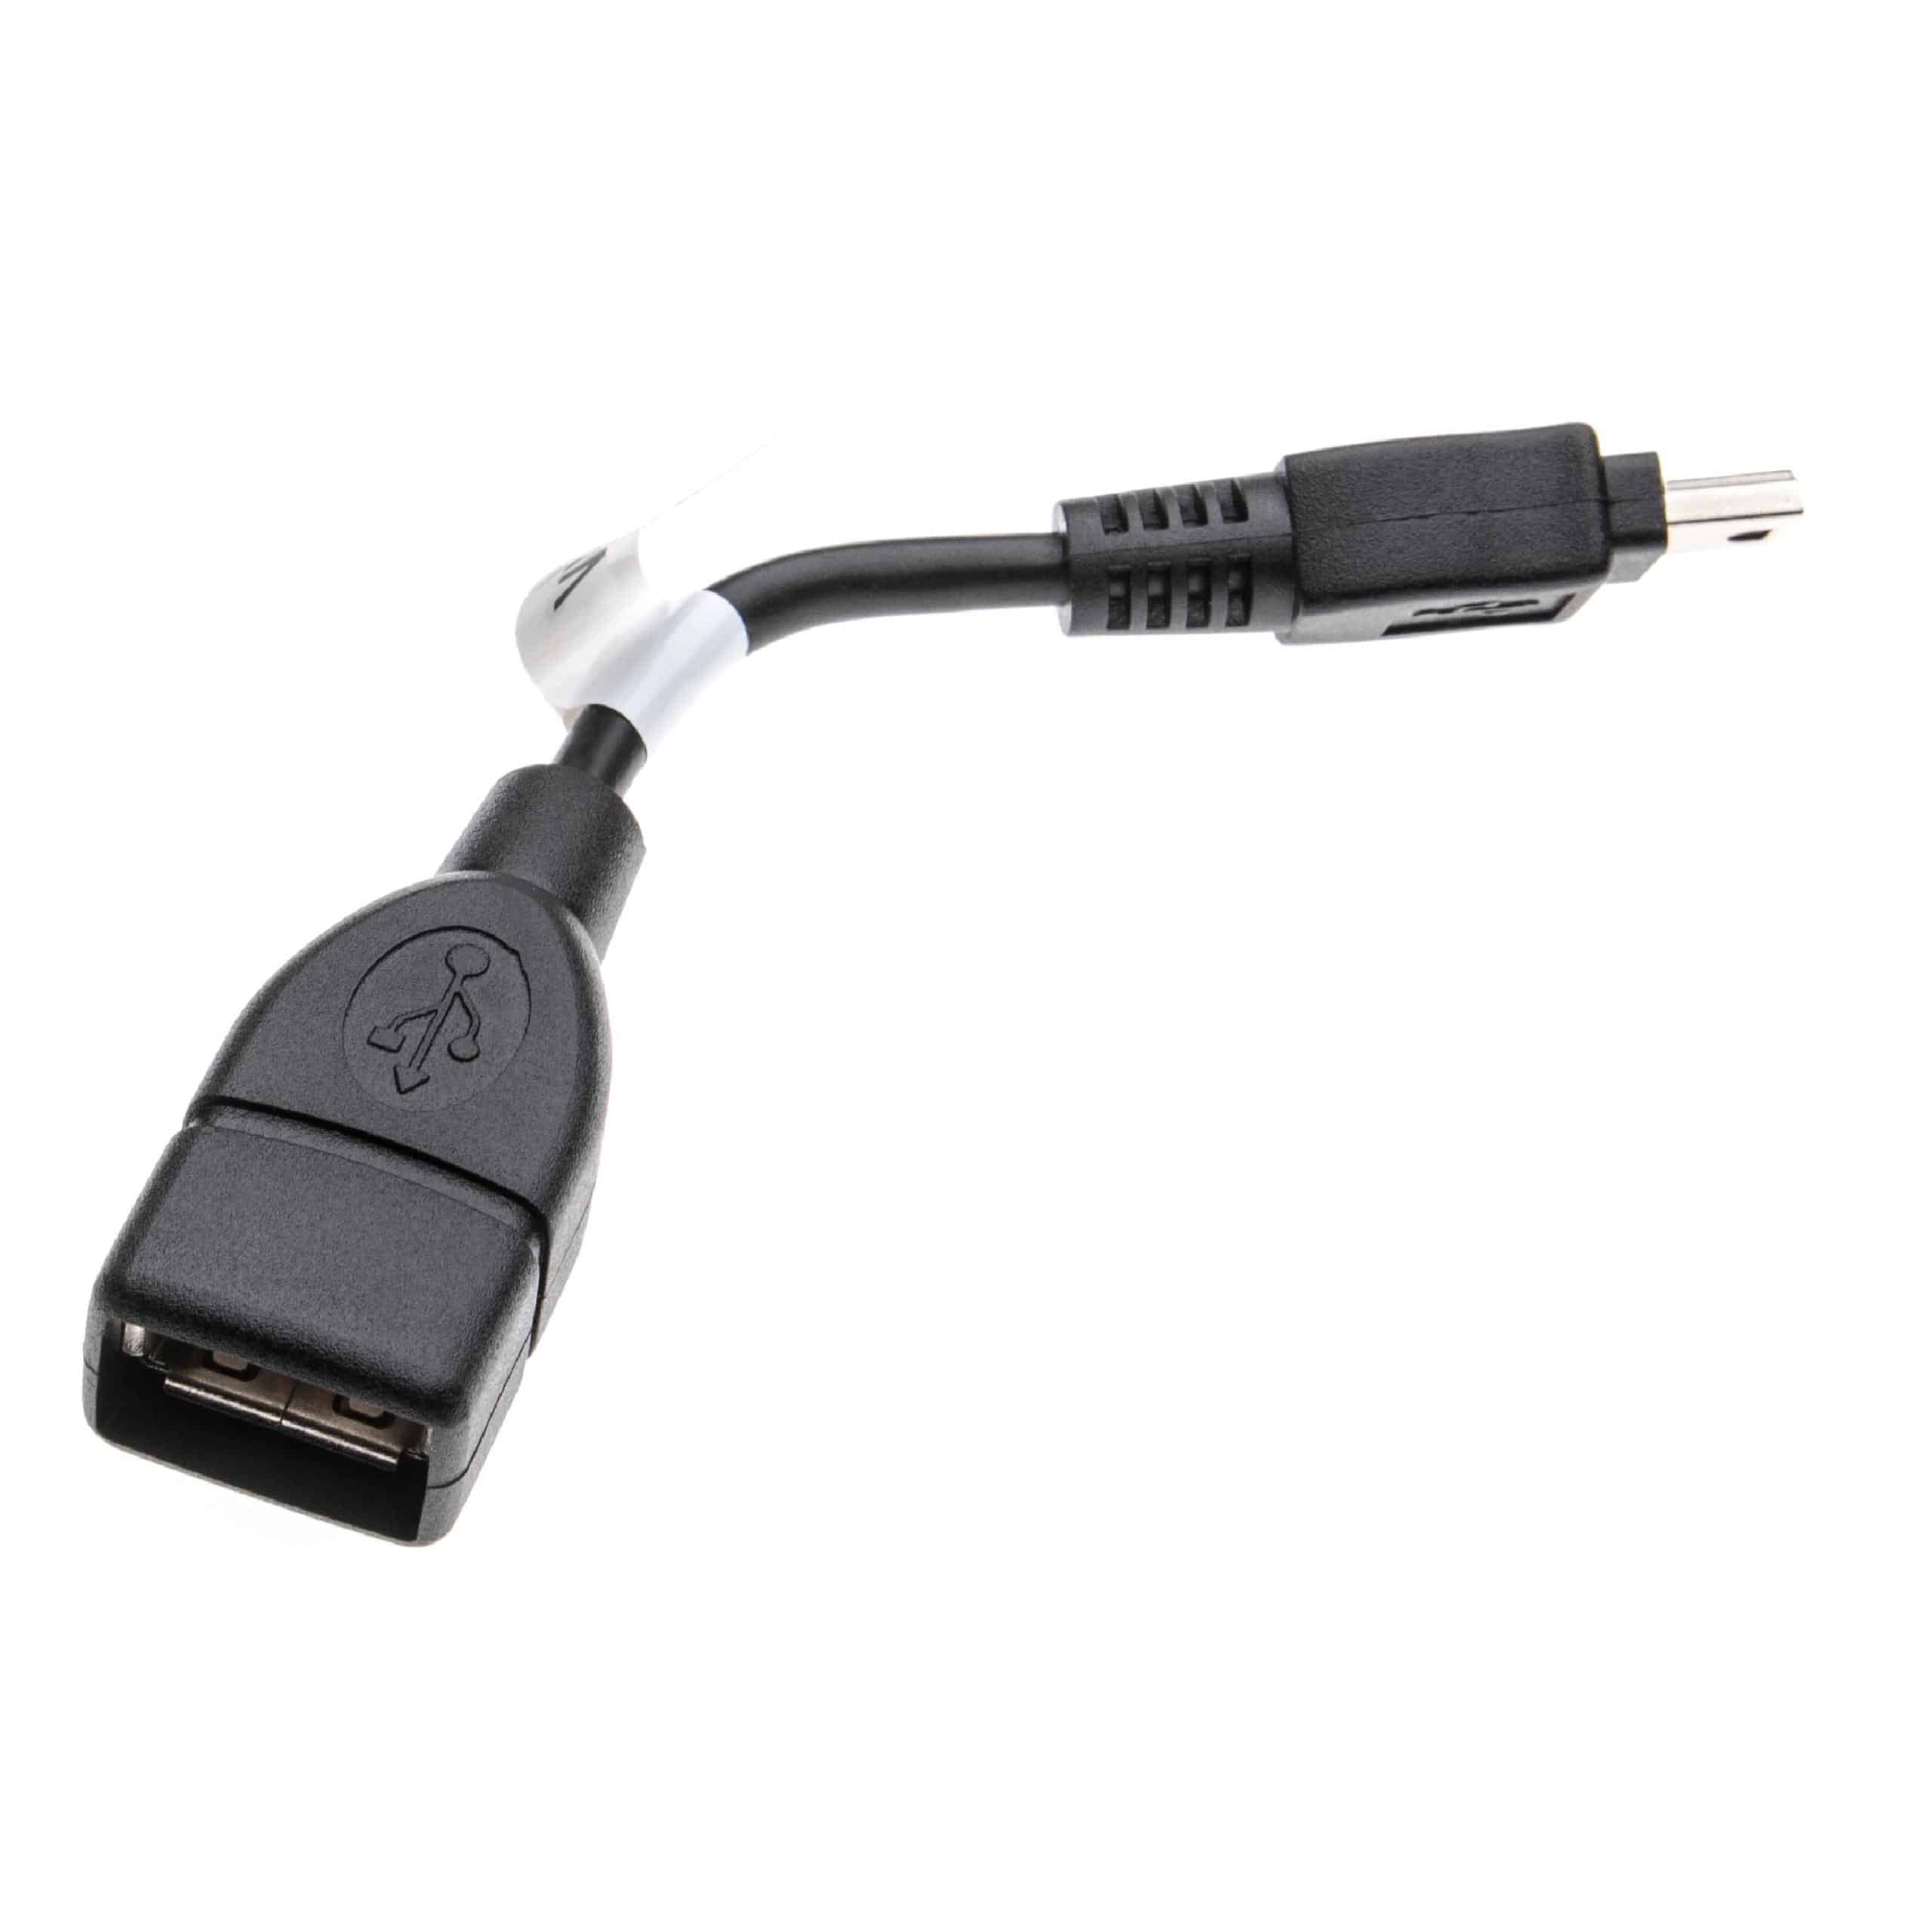 Adapter OTG mini-USB (male) to USB A socket for smartphone, tablet, netbook, laptop